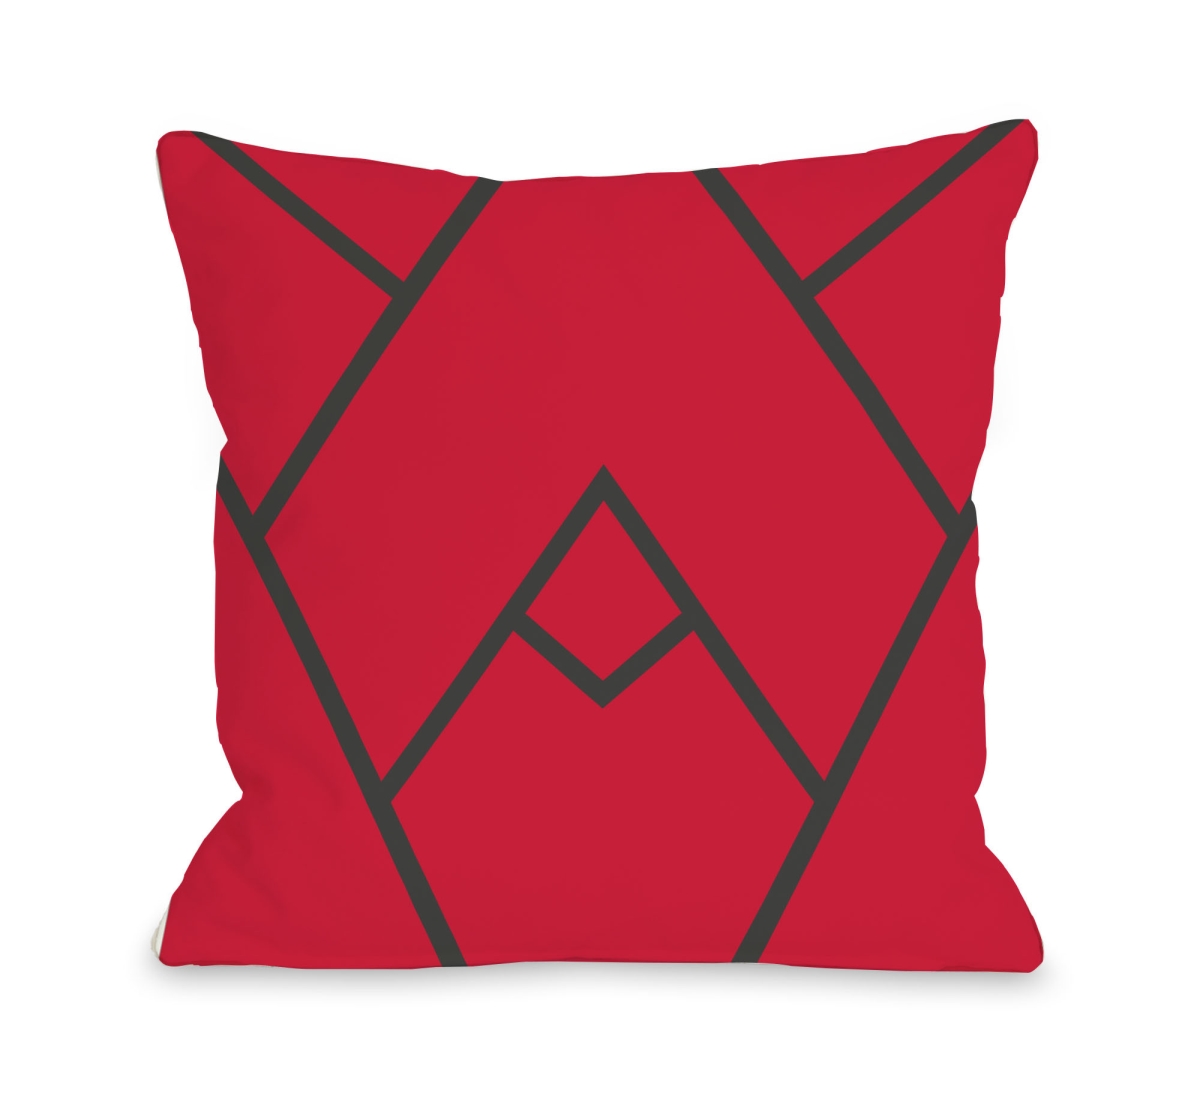 70717pl16o 16 X 16 In. Mountain Peak Pillow Outdoor, Red